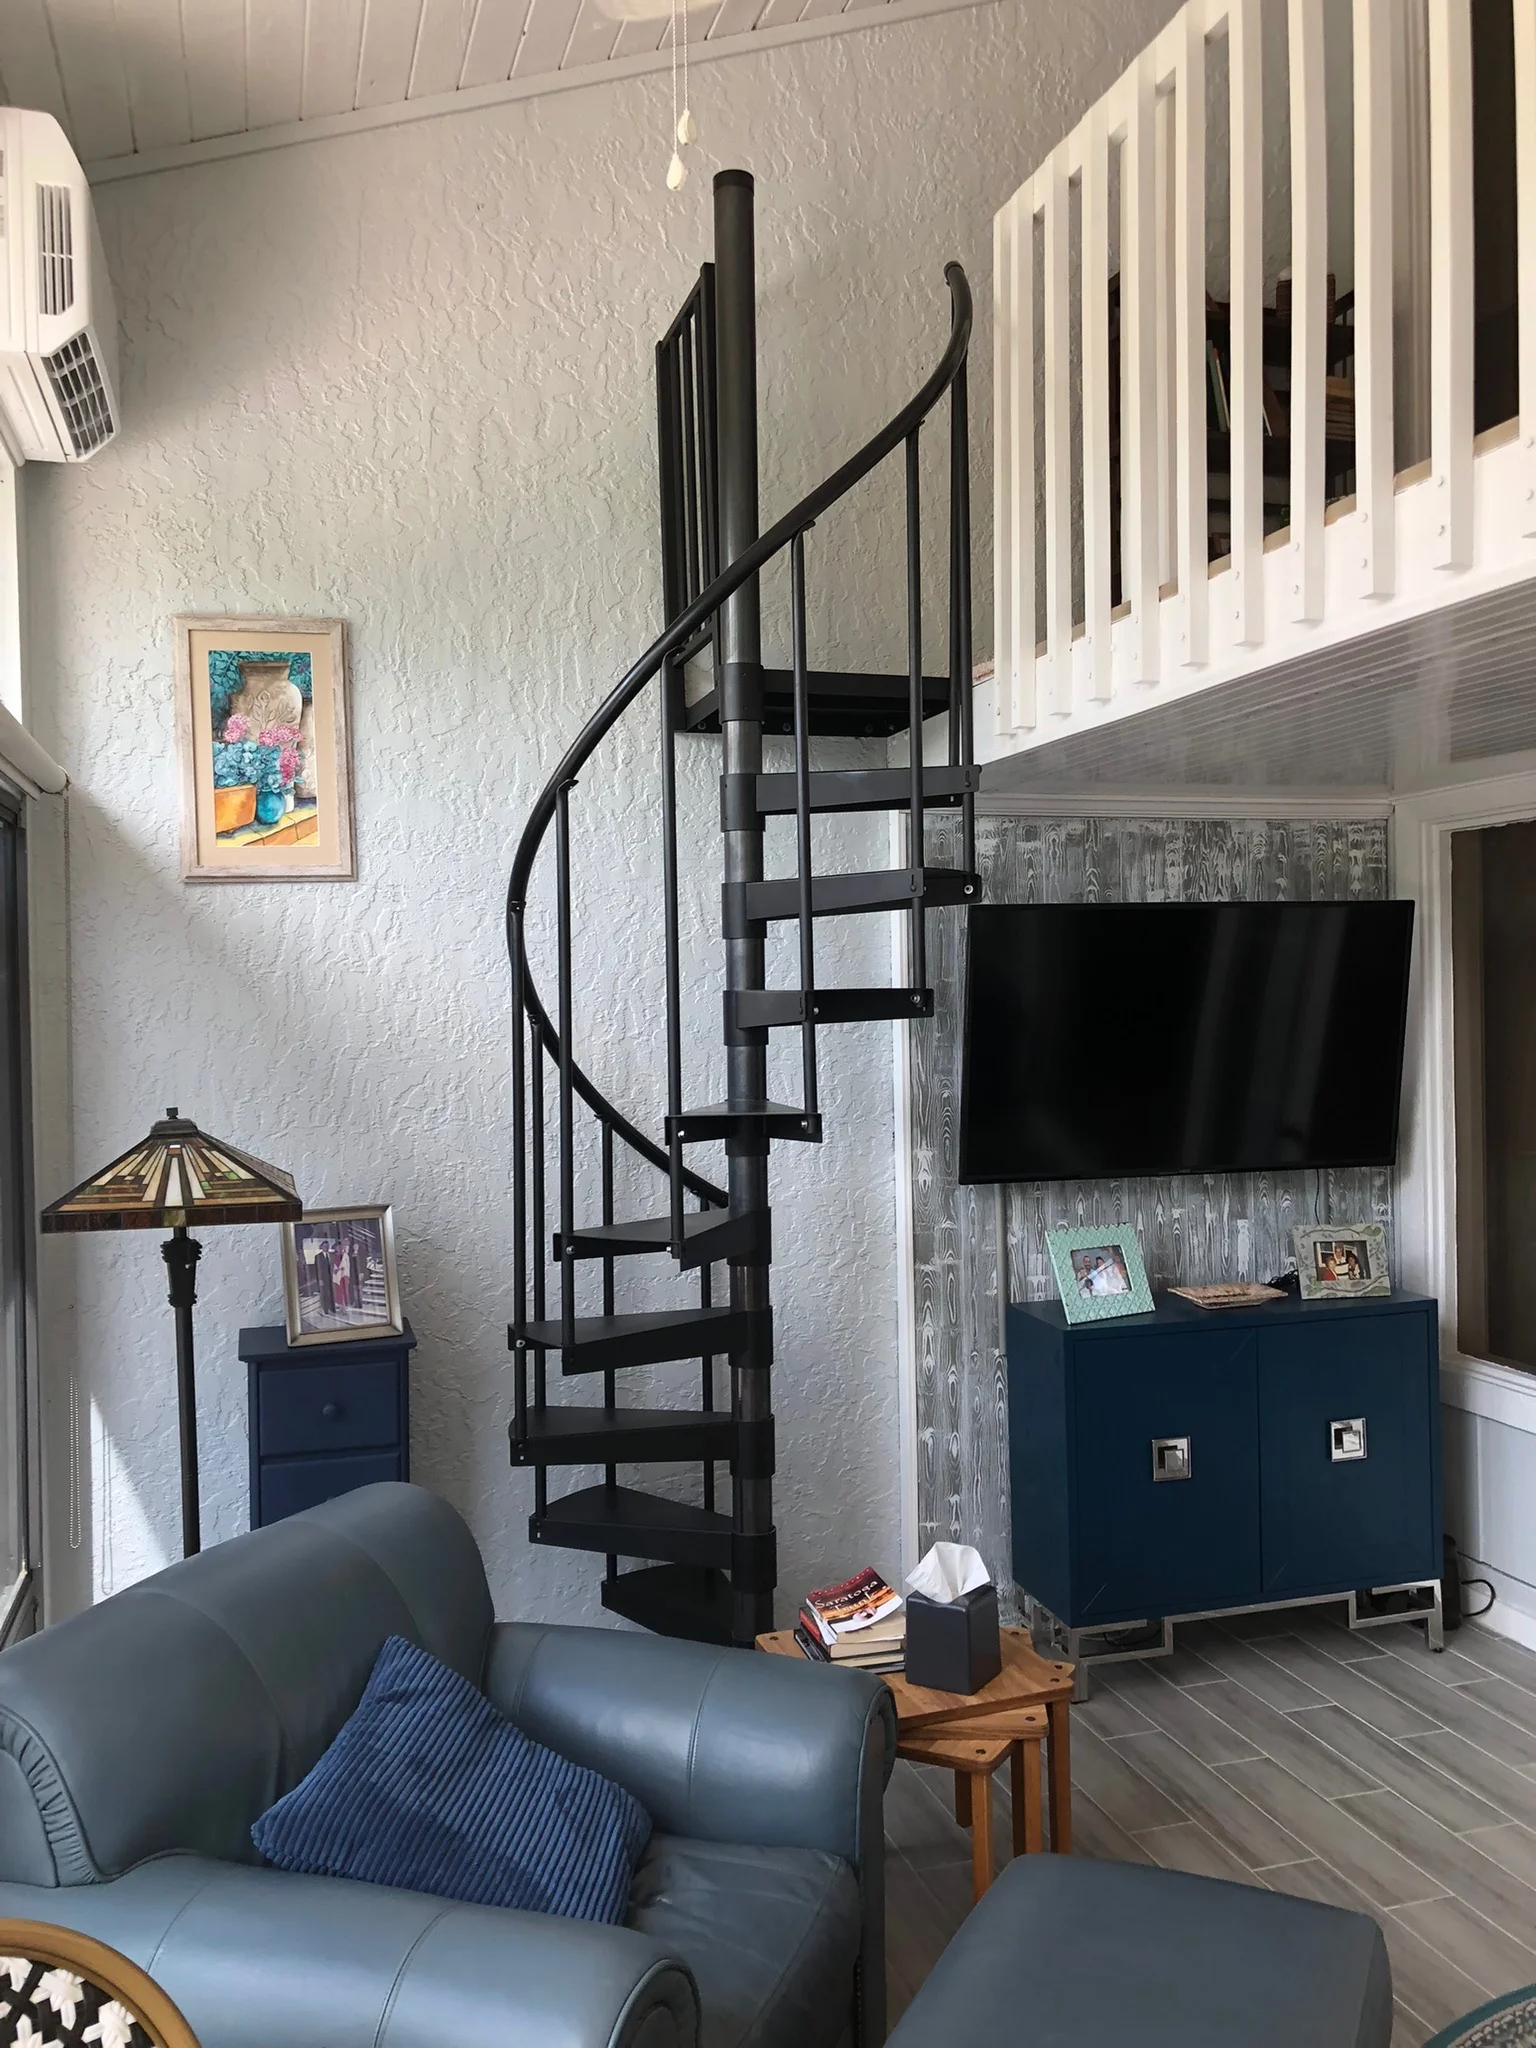 client indoor spiral staircase